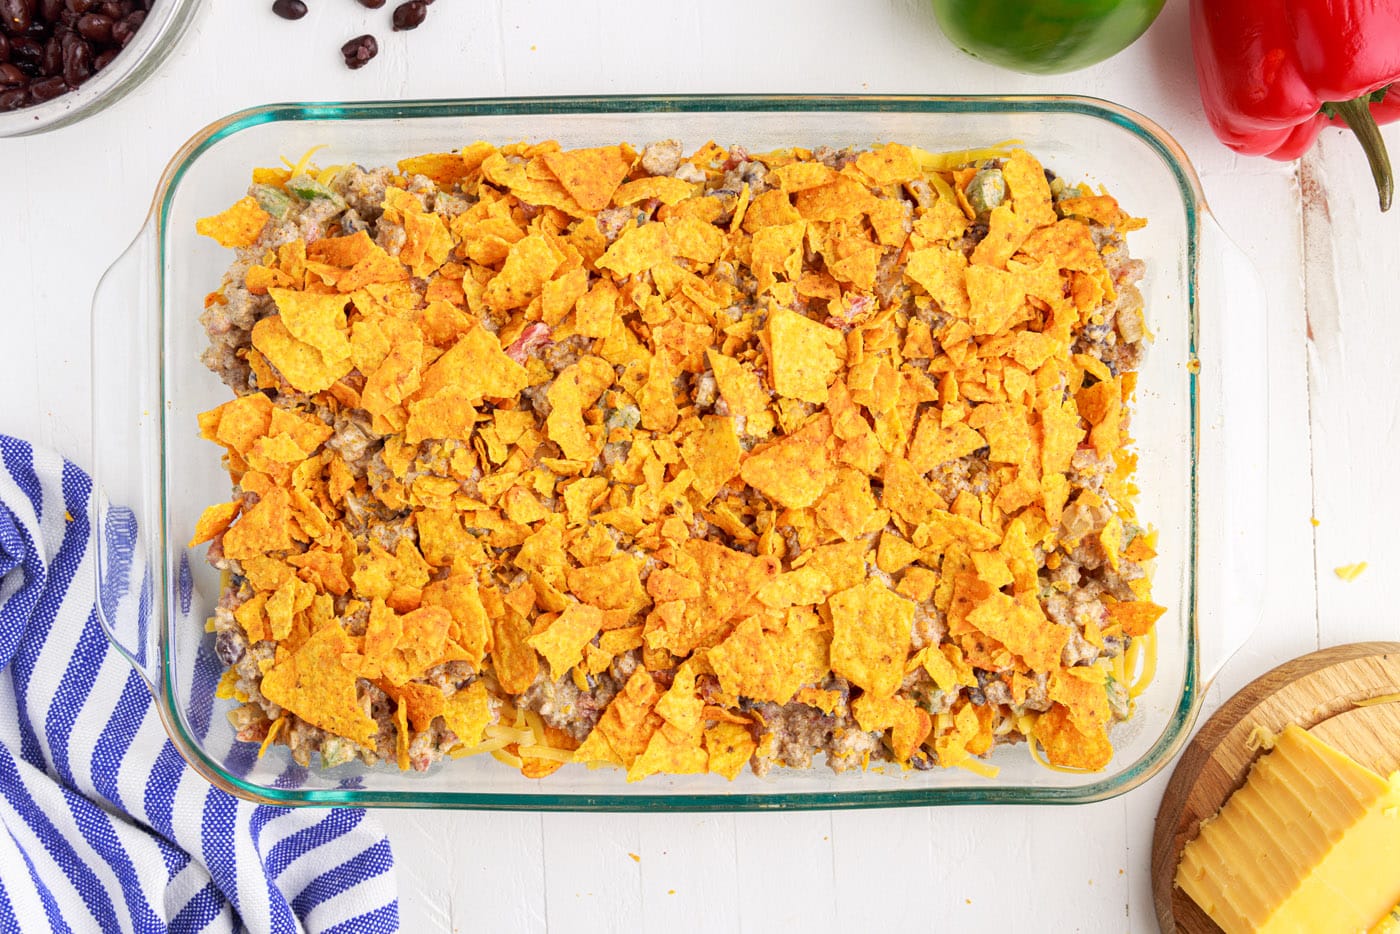 crushed doritos chips over the top of dorito casserole